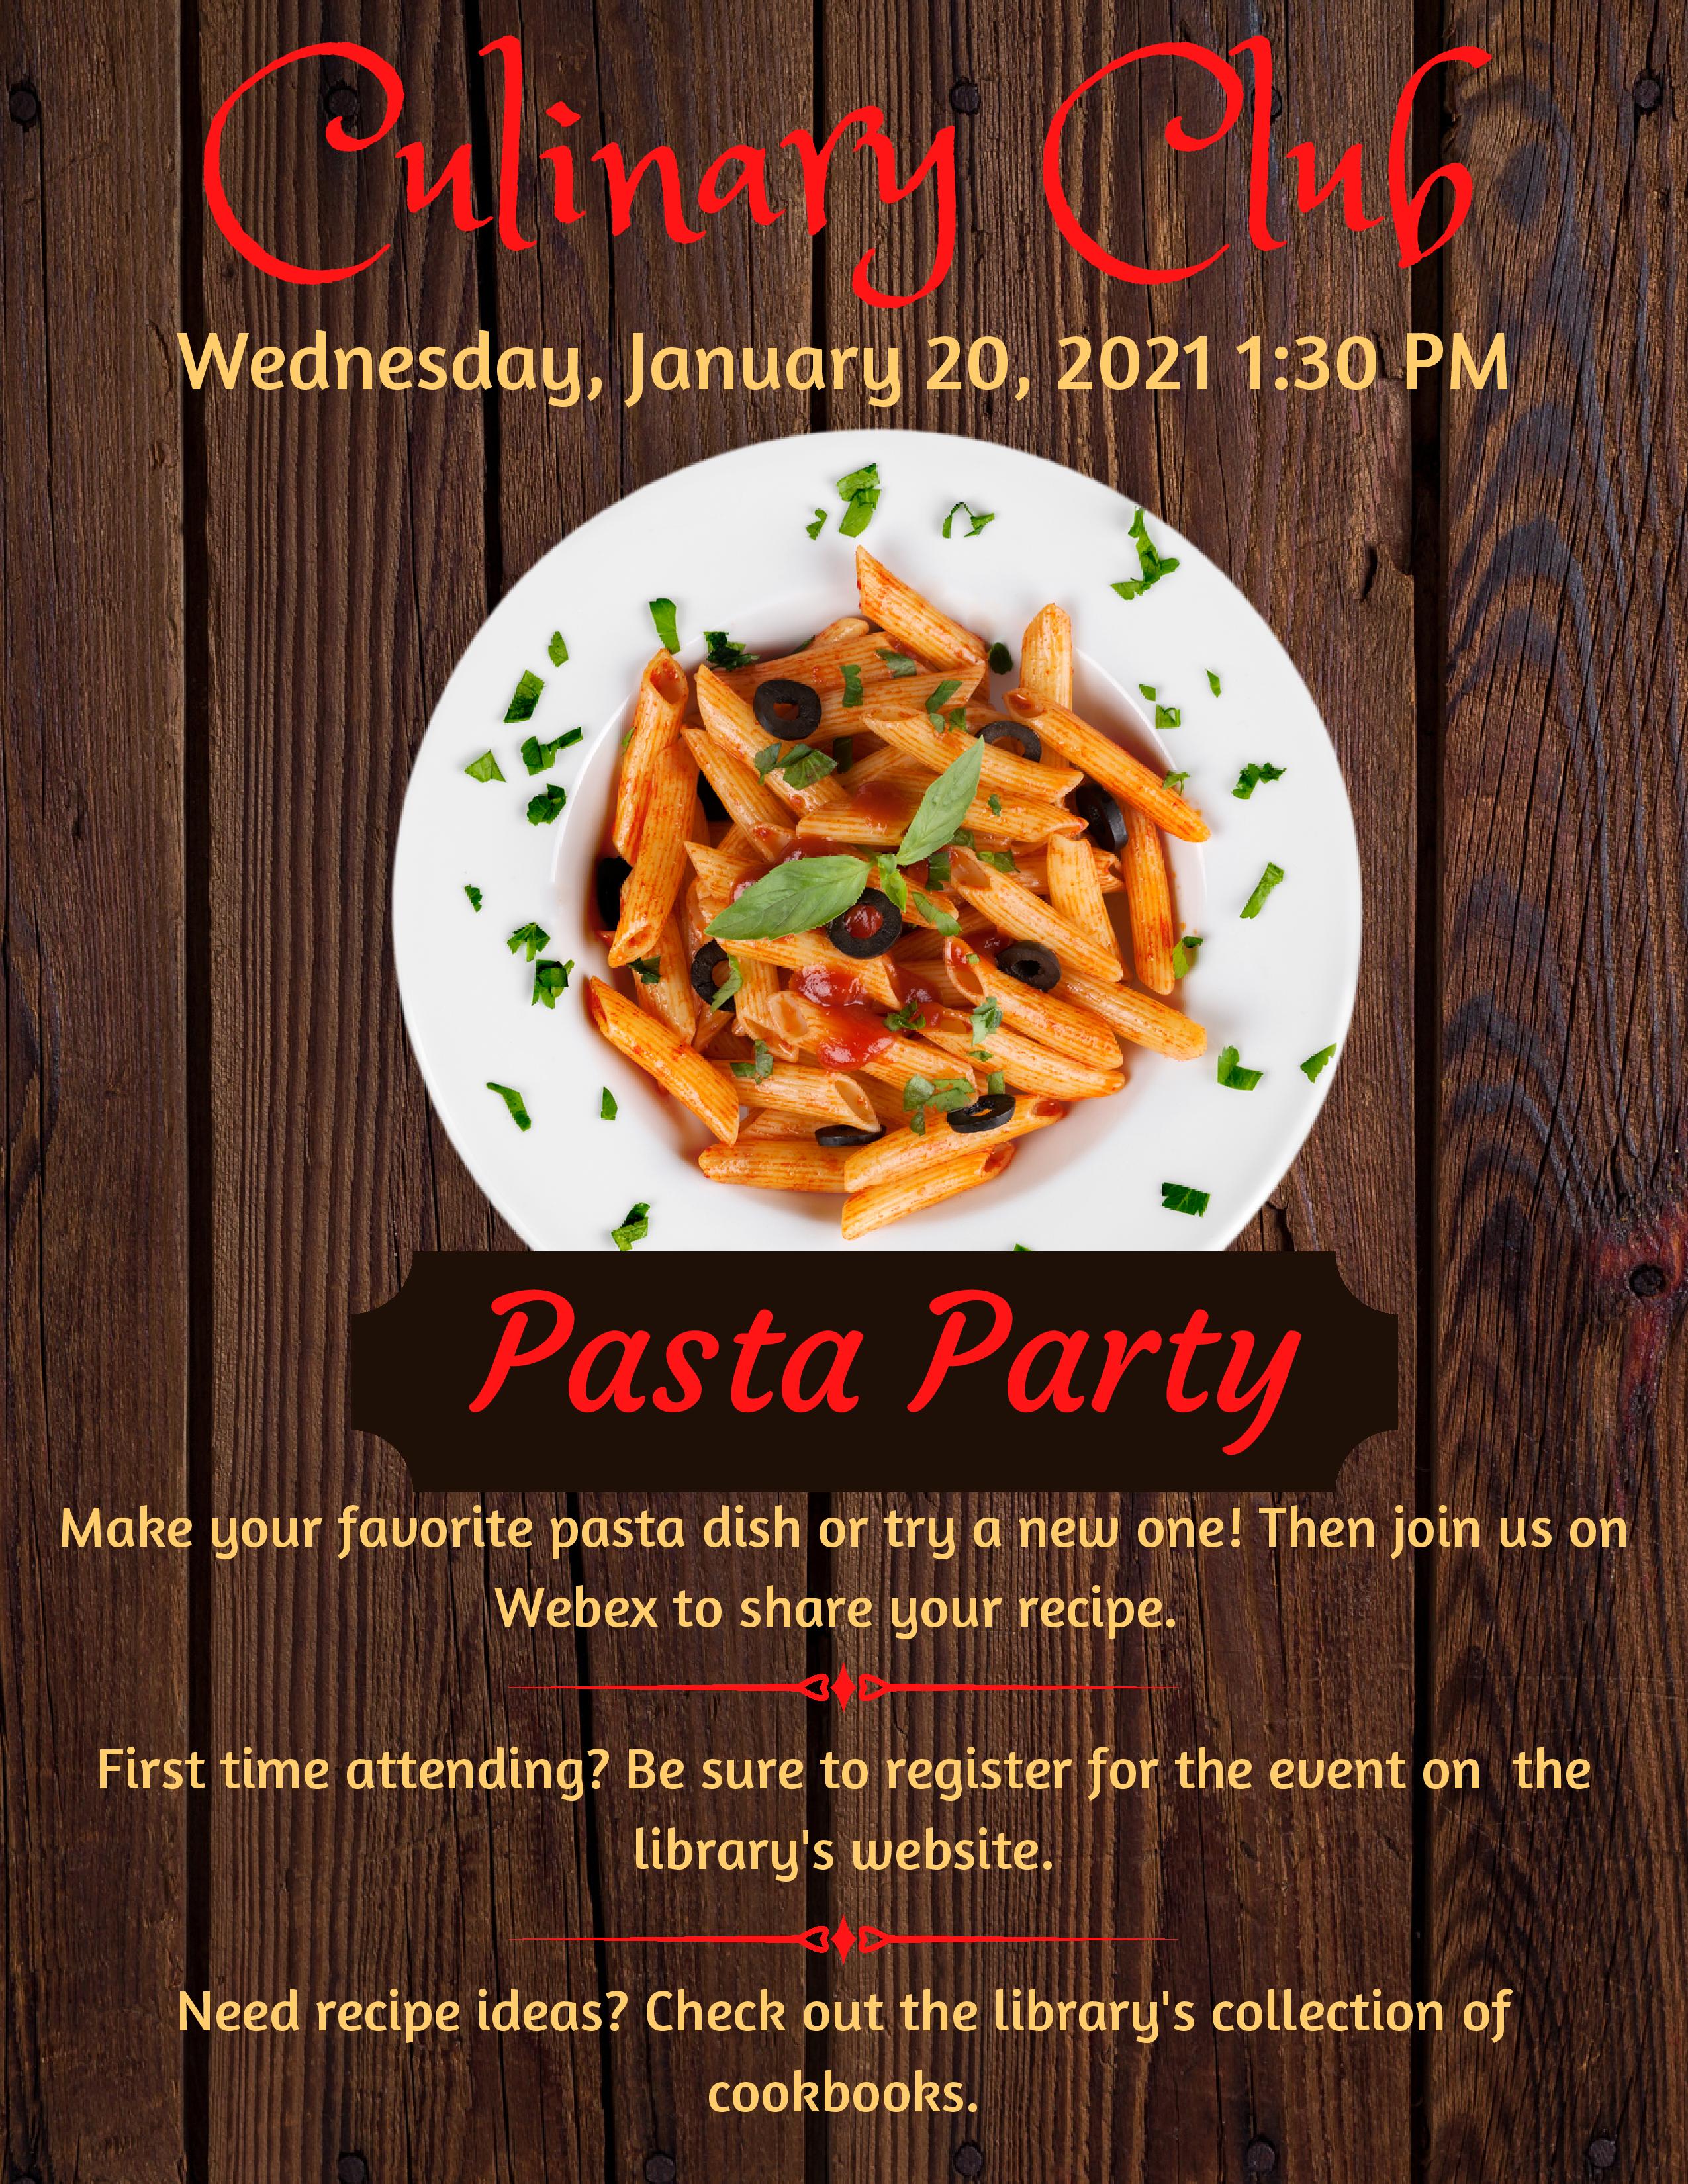 program flyer with picture of pasta on it.  Make your favorite pasta dish or try a new one!  Then join us on WebEx to share your recipe.  First time attending? Be sure to register for the event on the library's website.  Need recipe ideas? Check out the library's collection of cookbooks.